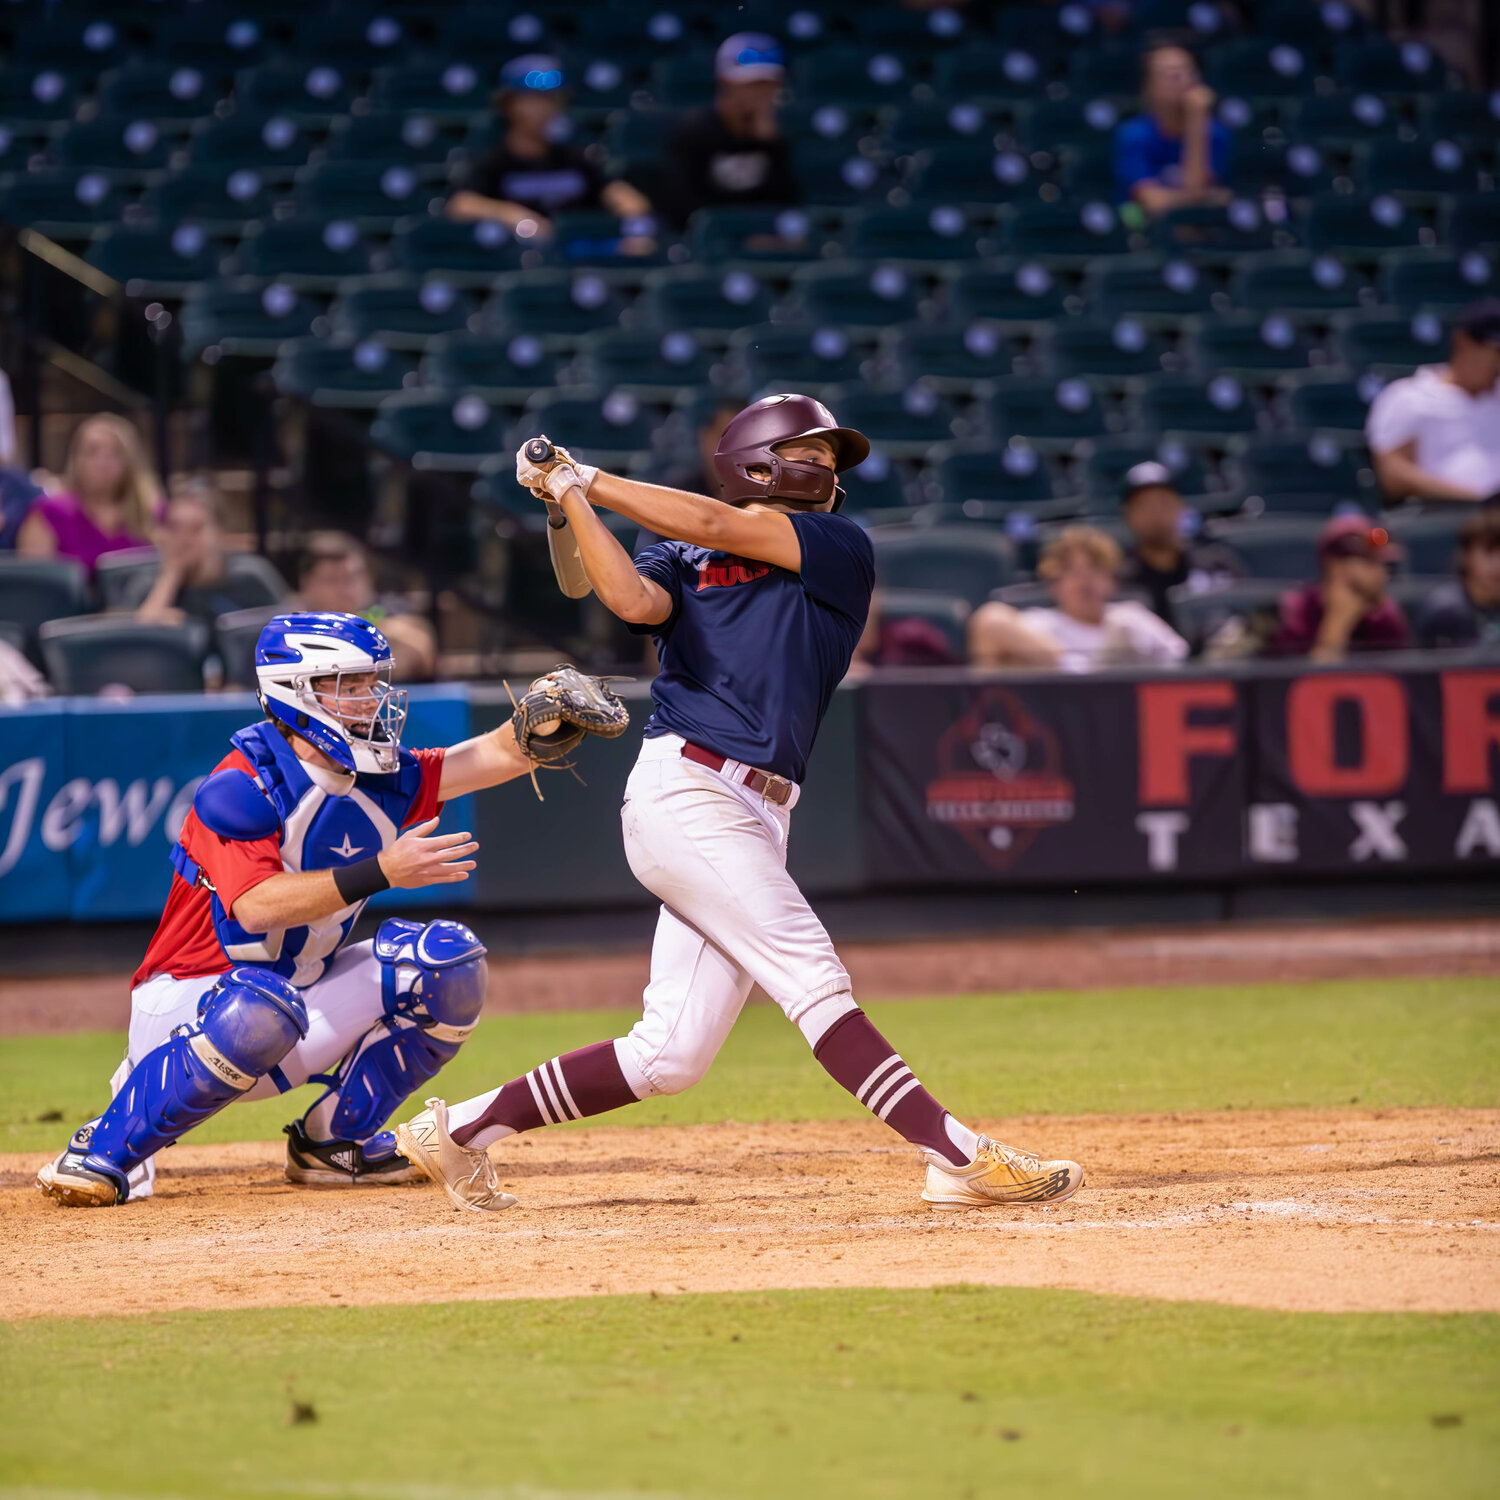 Connor Ficarra hits during Tuesday's GHBCA Futures All-Star game at Constellation Field in Sugar Land.